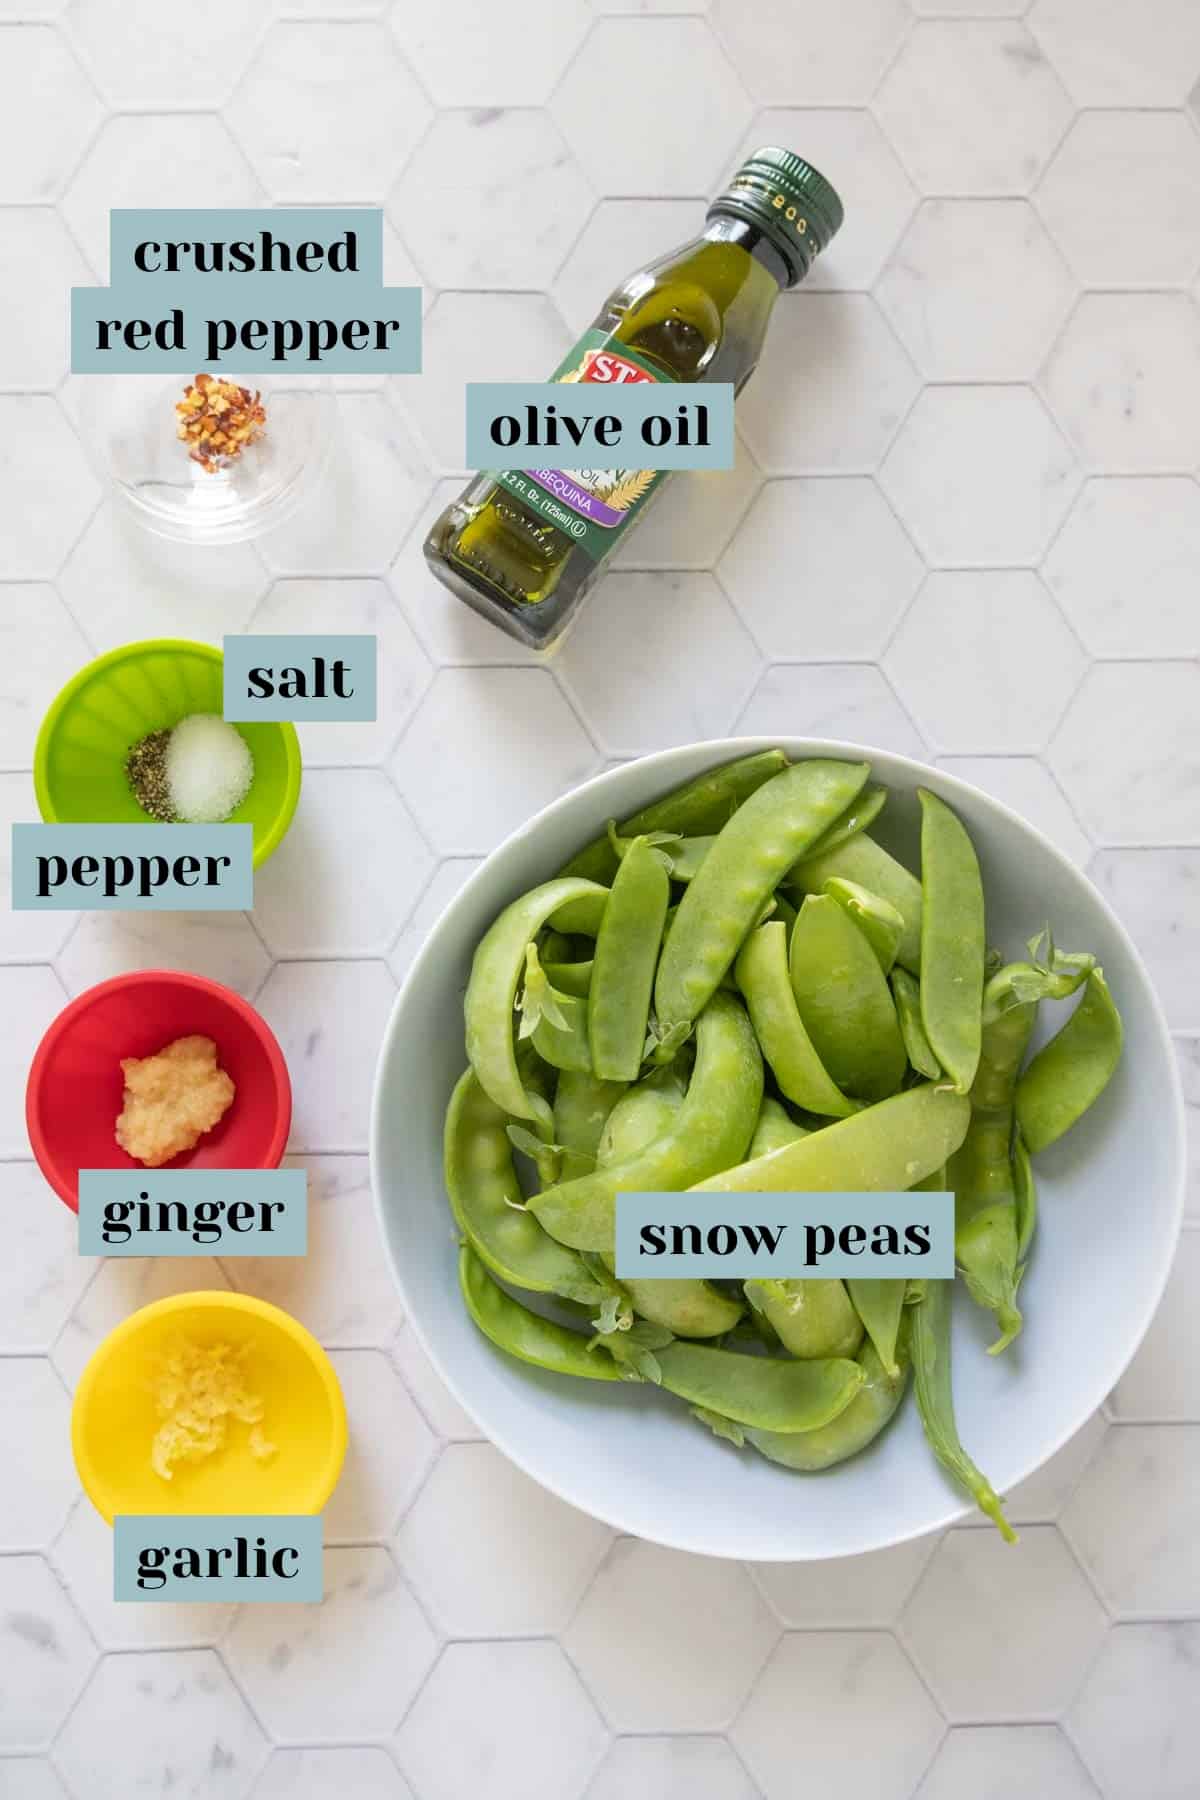 Ingredients for snow peas on a tile surface with labels.